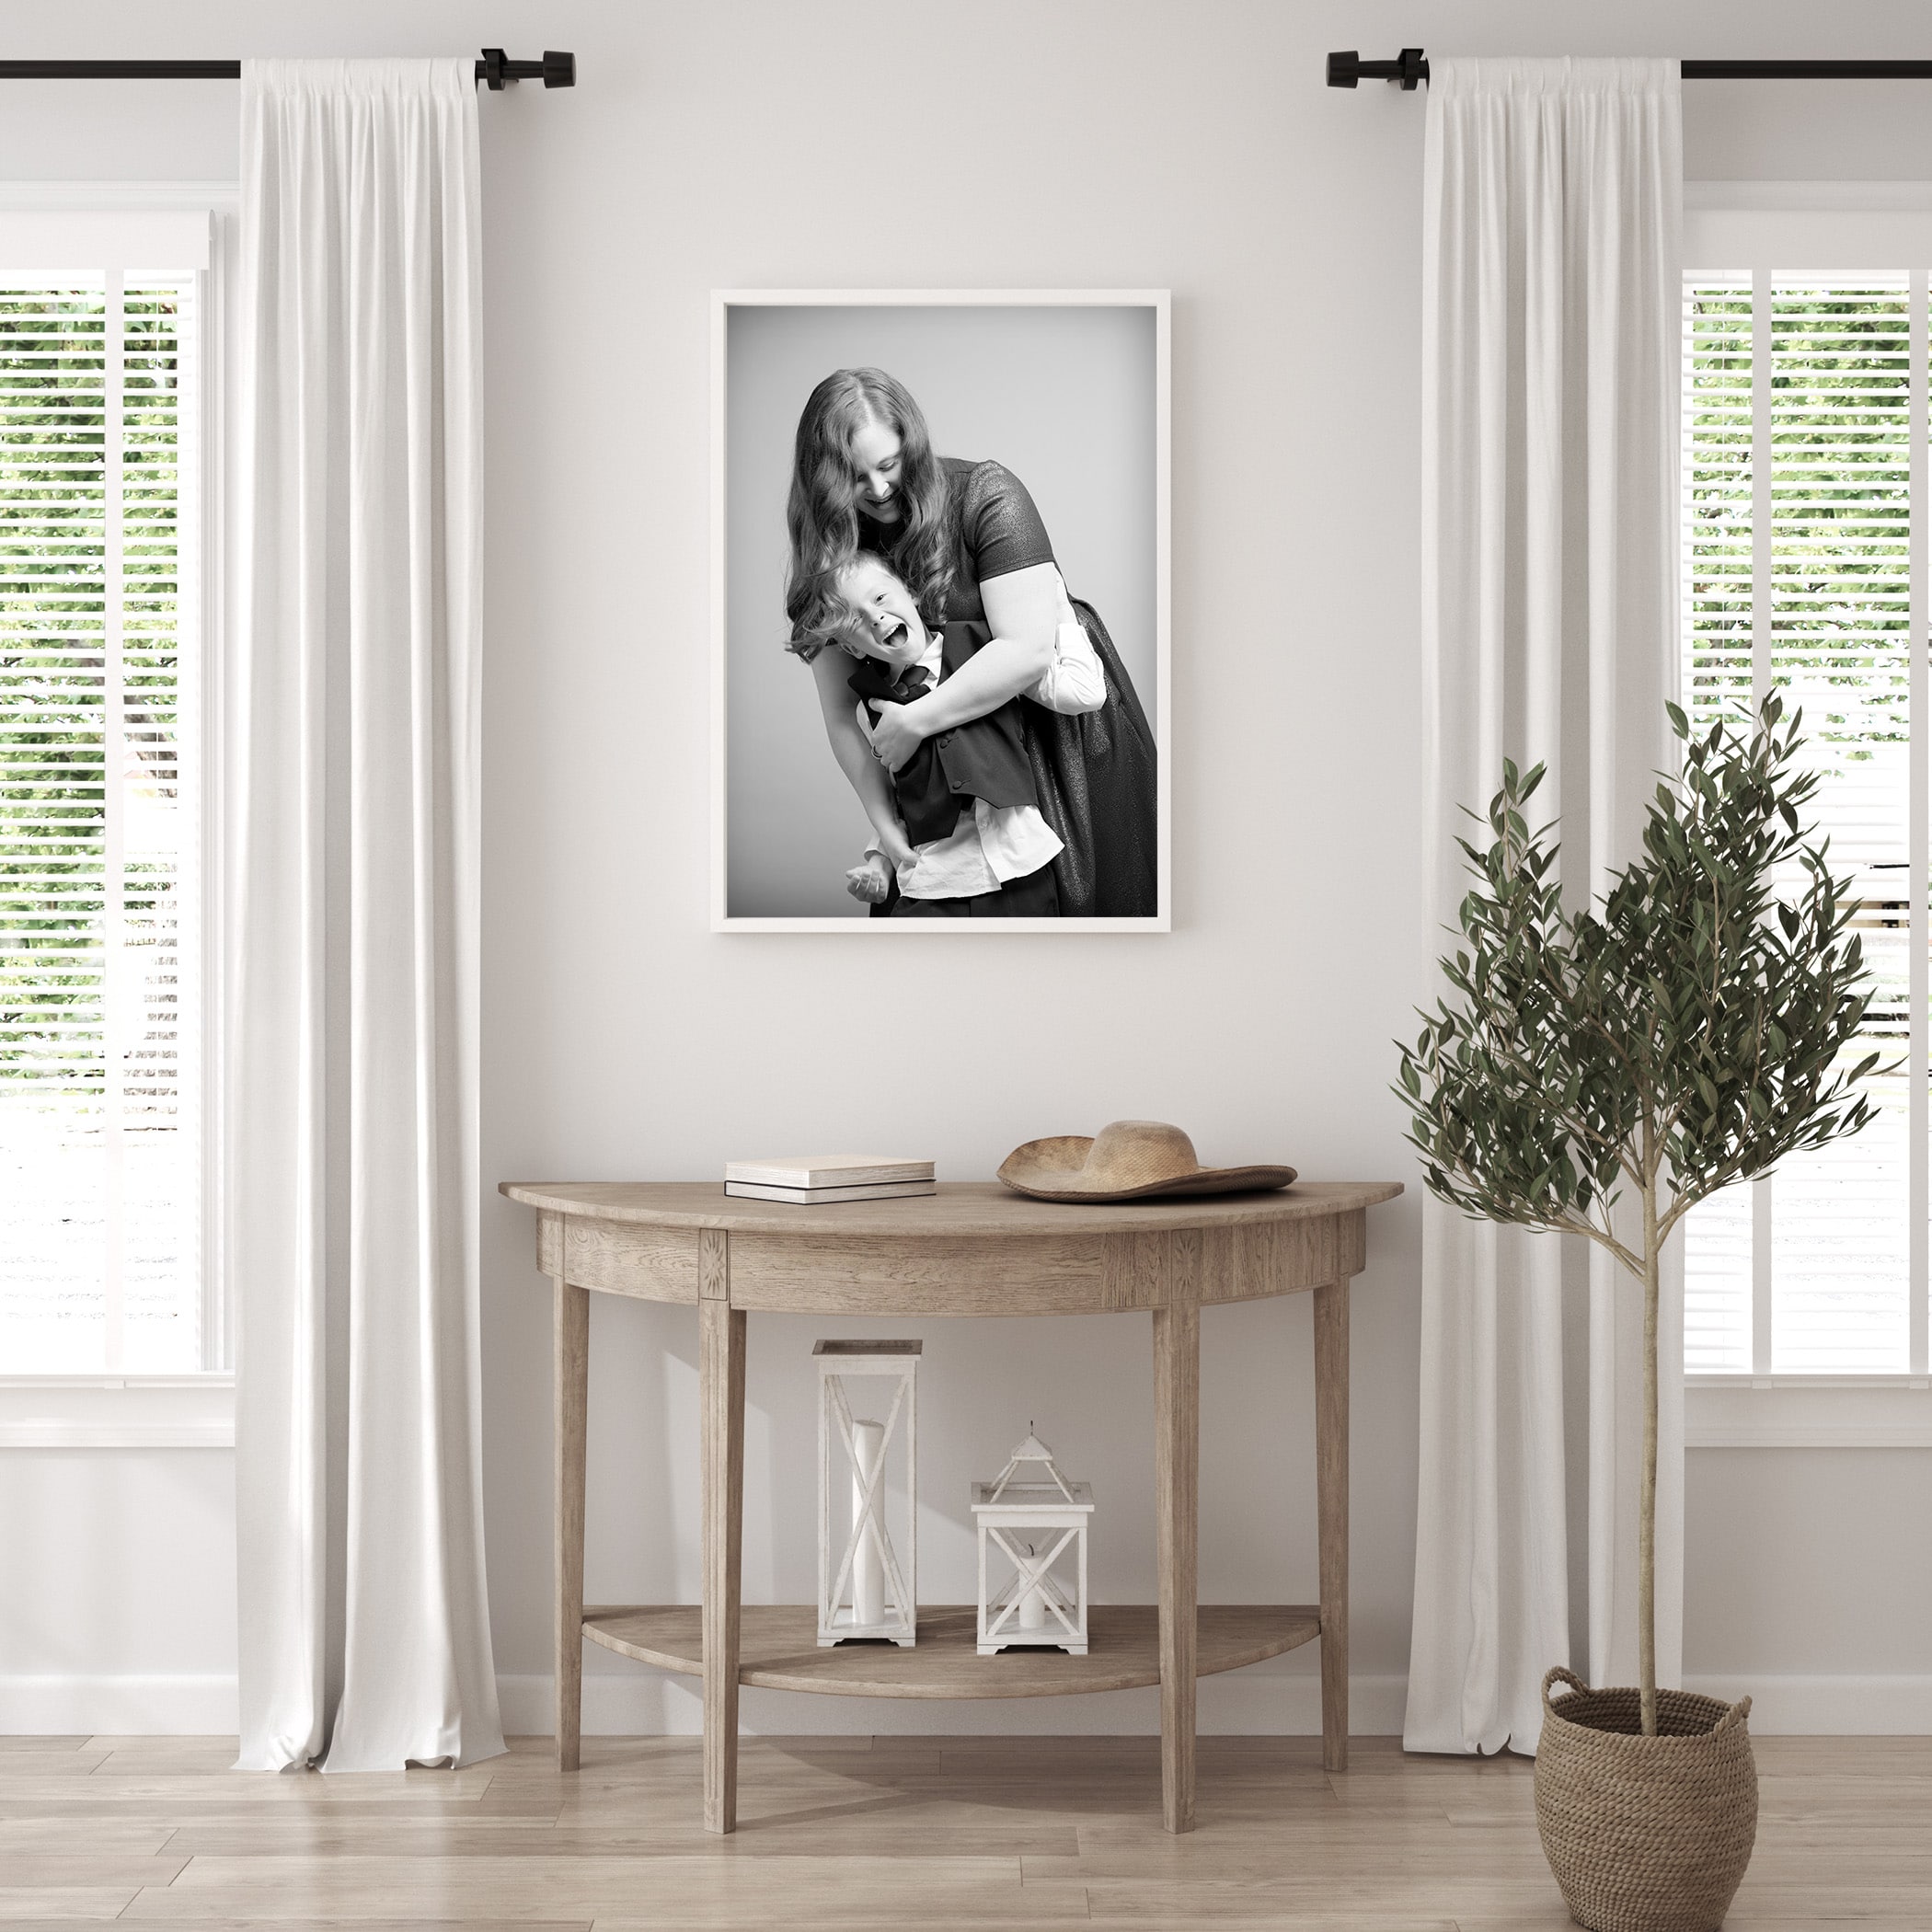 example of a framed wall portrait showing a mother and son laughing